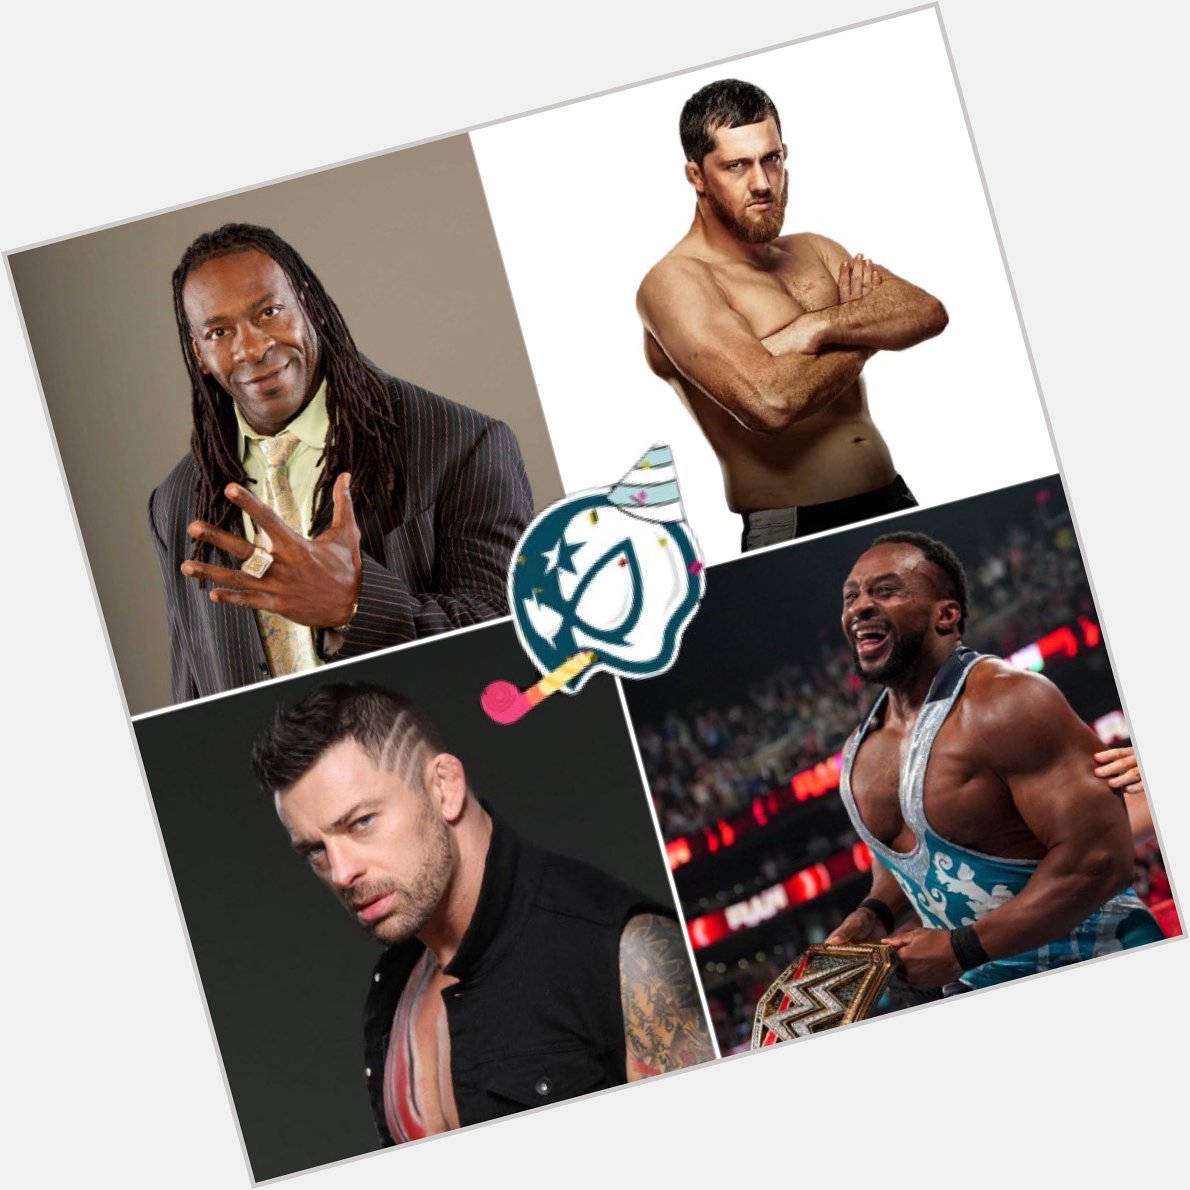 HAPPY BIRTHDAY wishes go out to:
Booker T (57)
Kyle O Reilly (35)
Davey Richards (39)
Big E (36) 